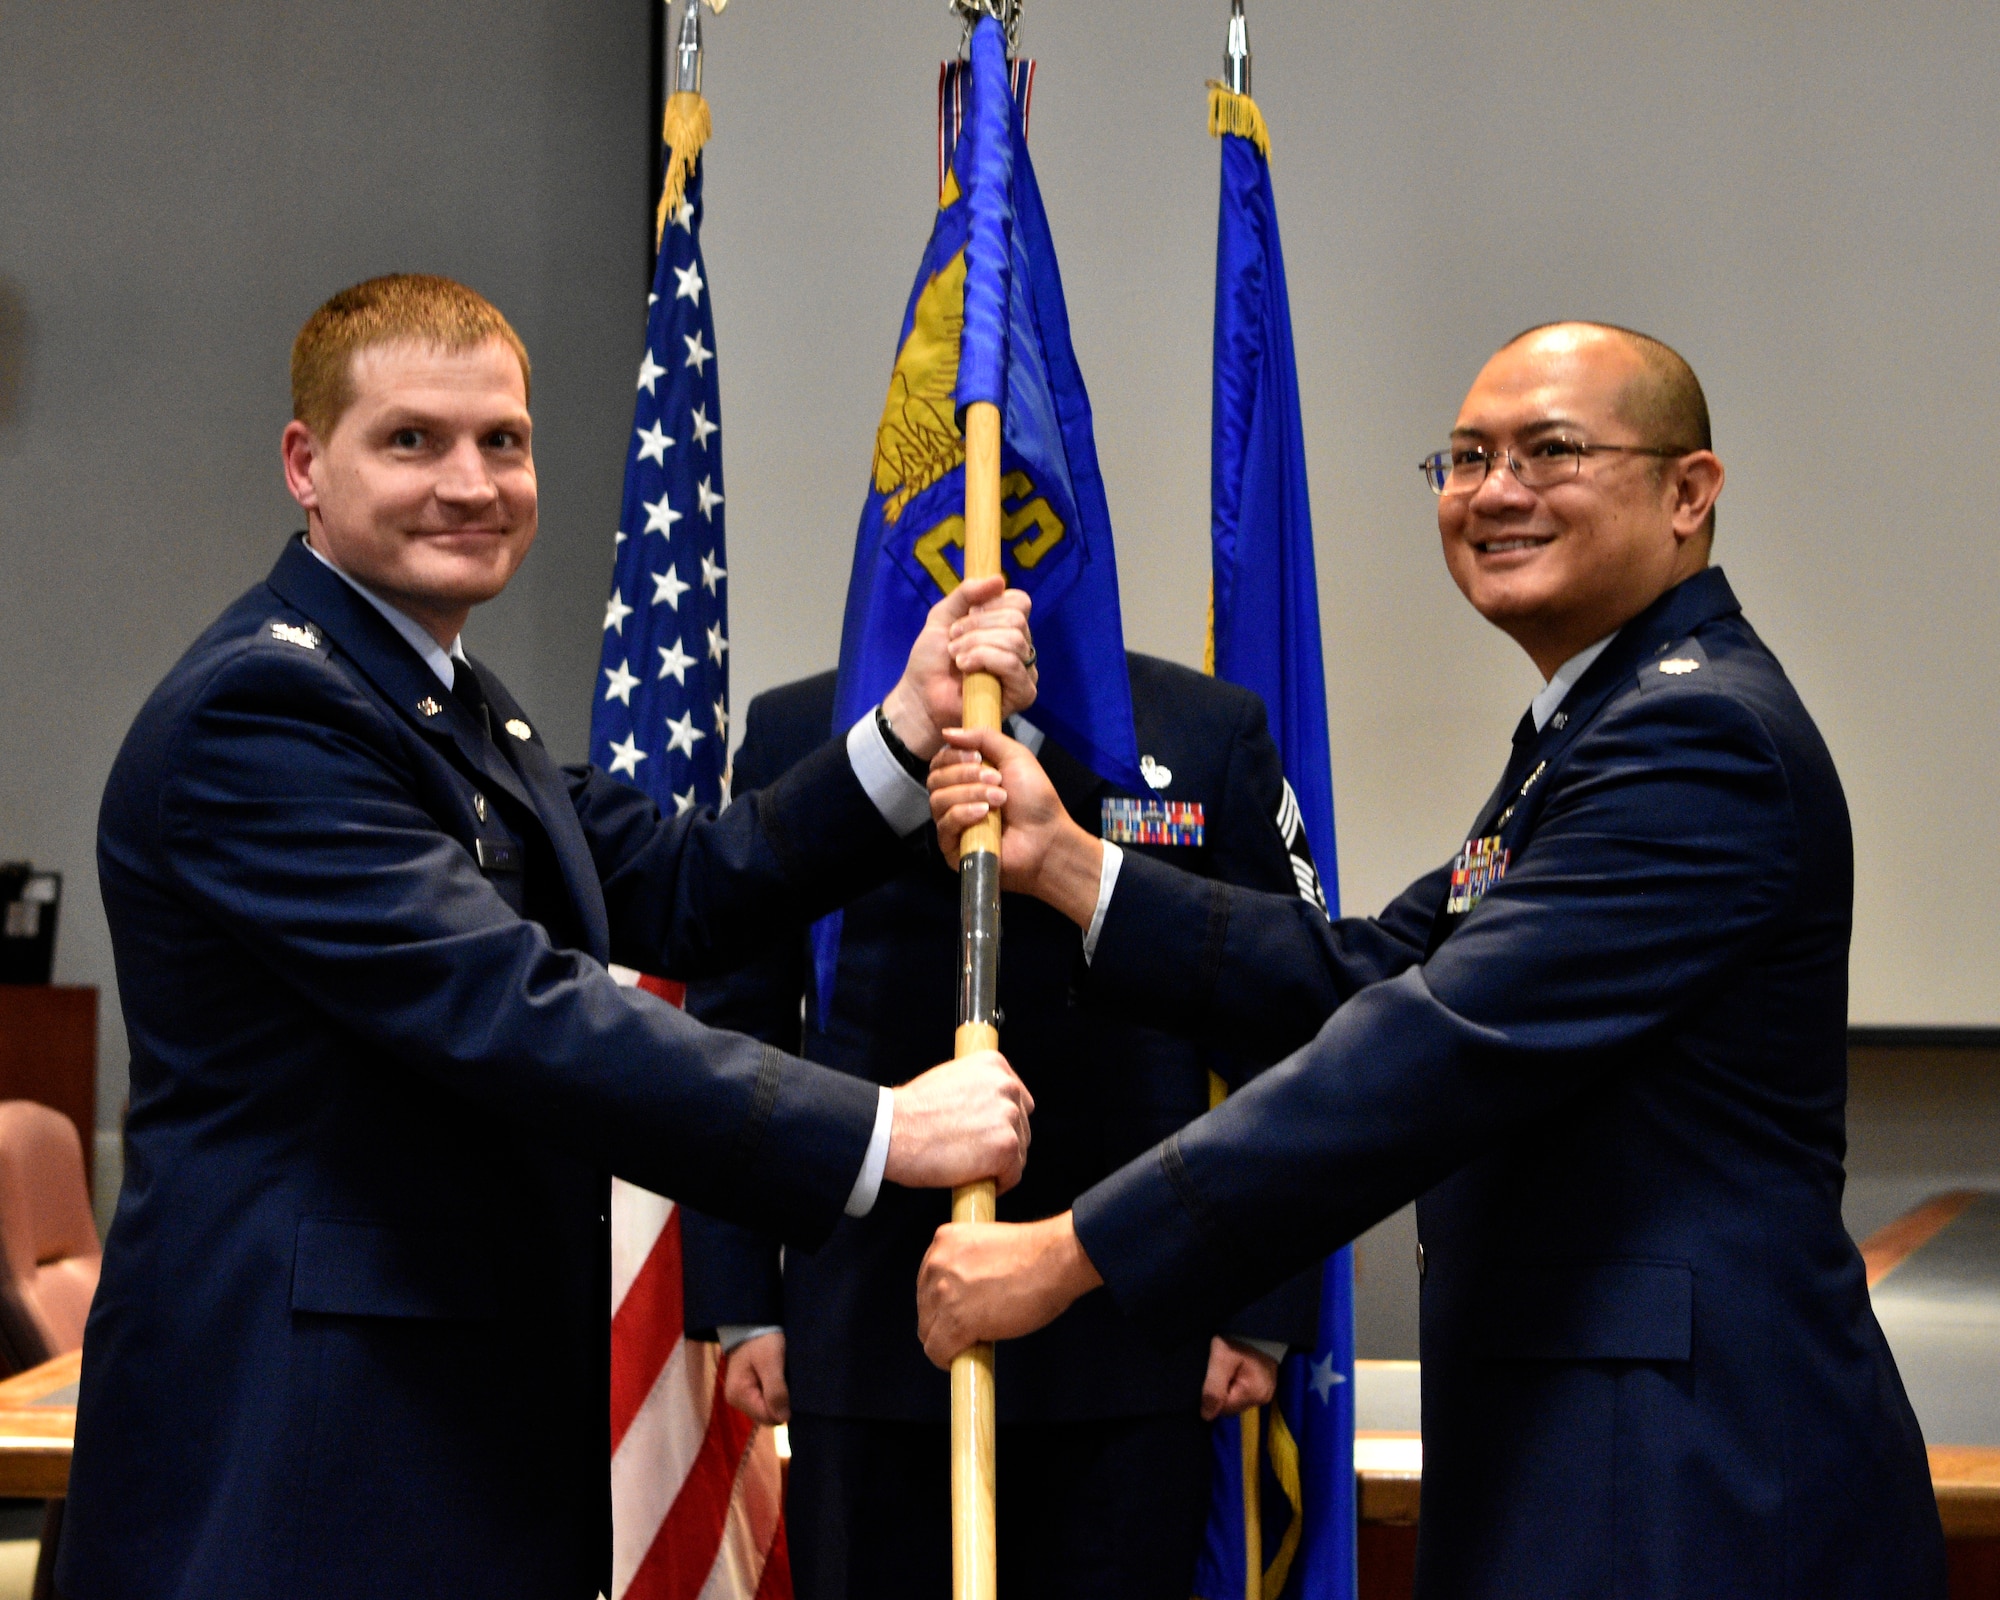 Westover welcomes new 439th Communications Squadron Commander